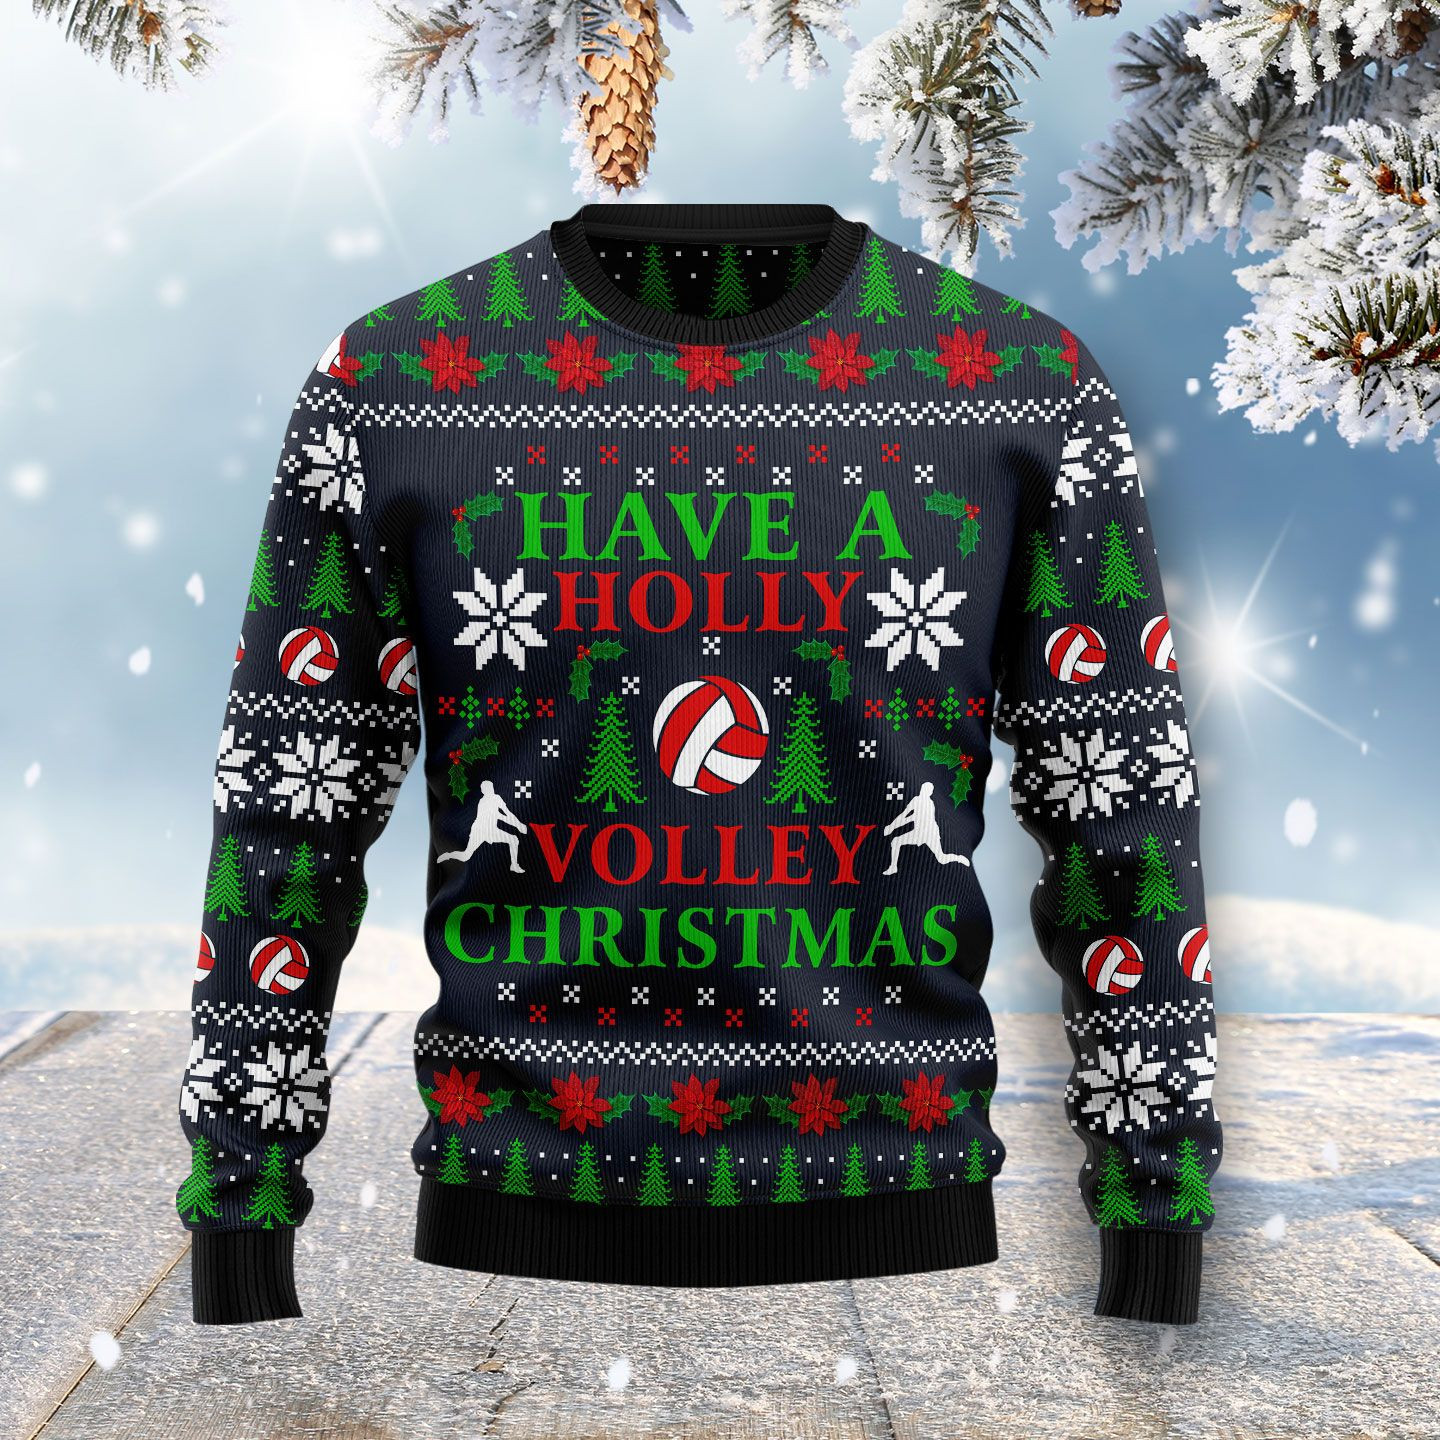 Holly Volley Volleyball Christmas Ugly Christmas Sweater Ugly Sweater For Men Women